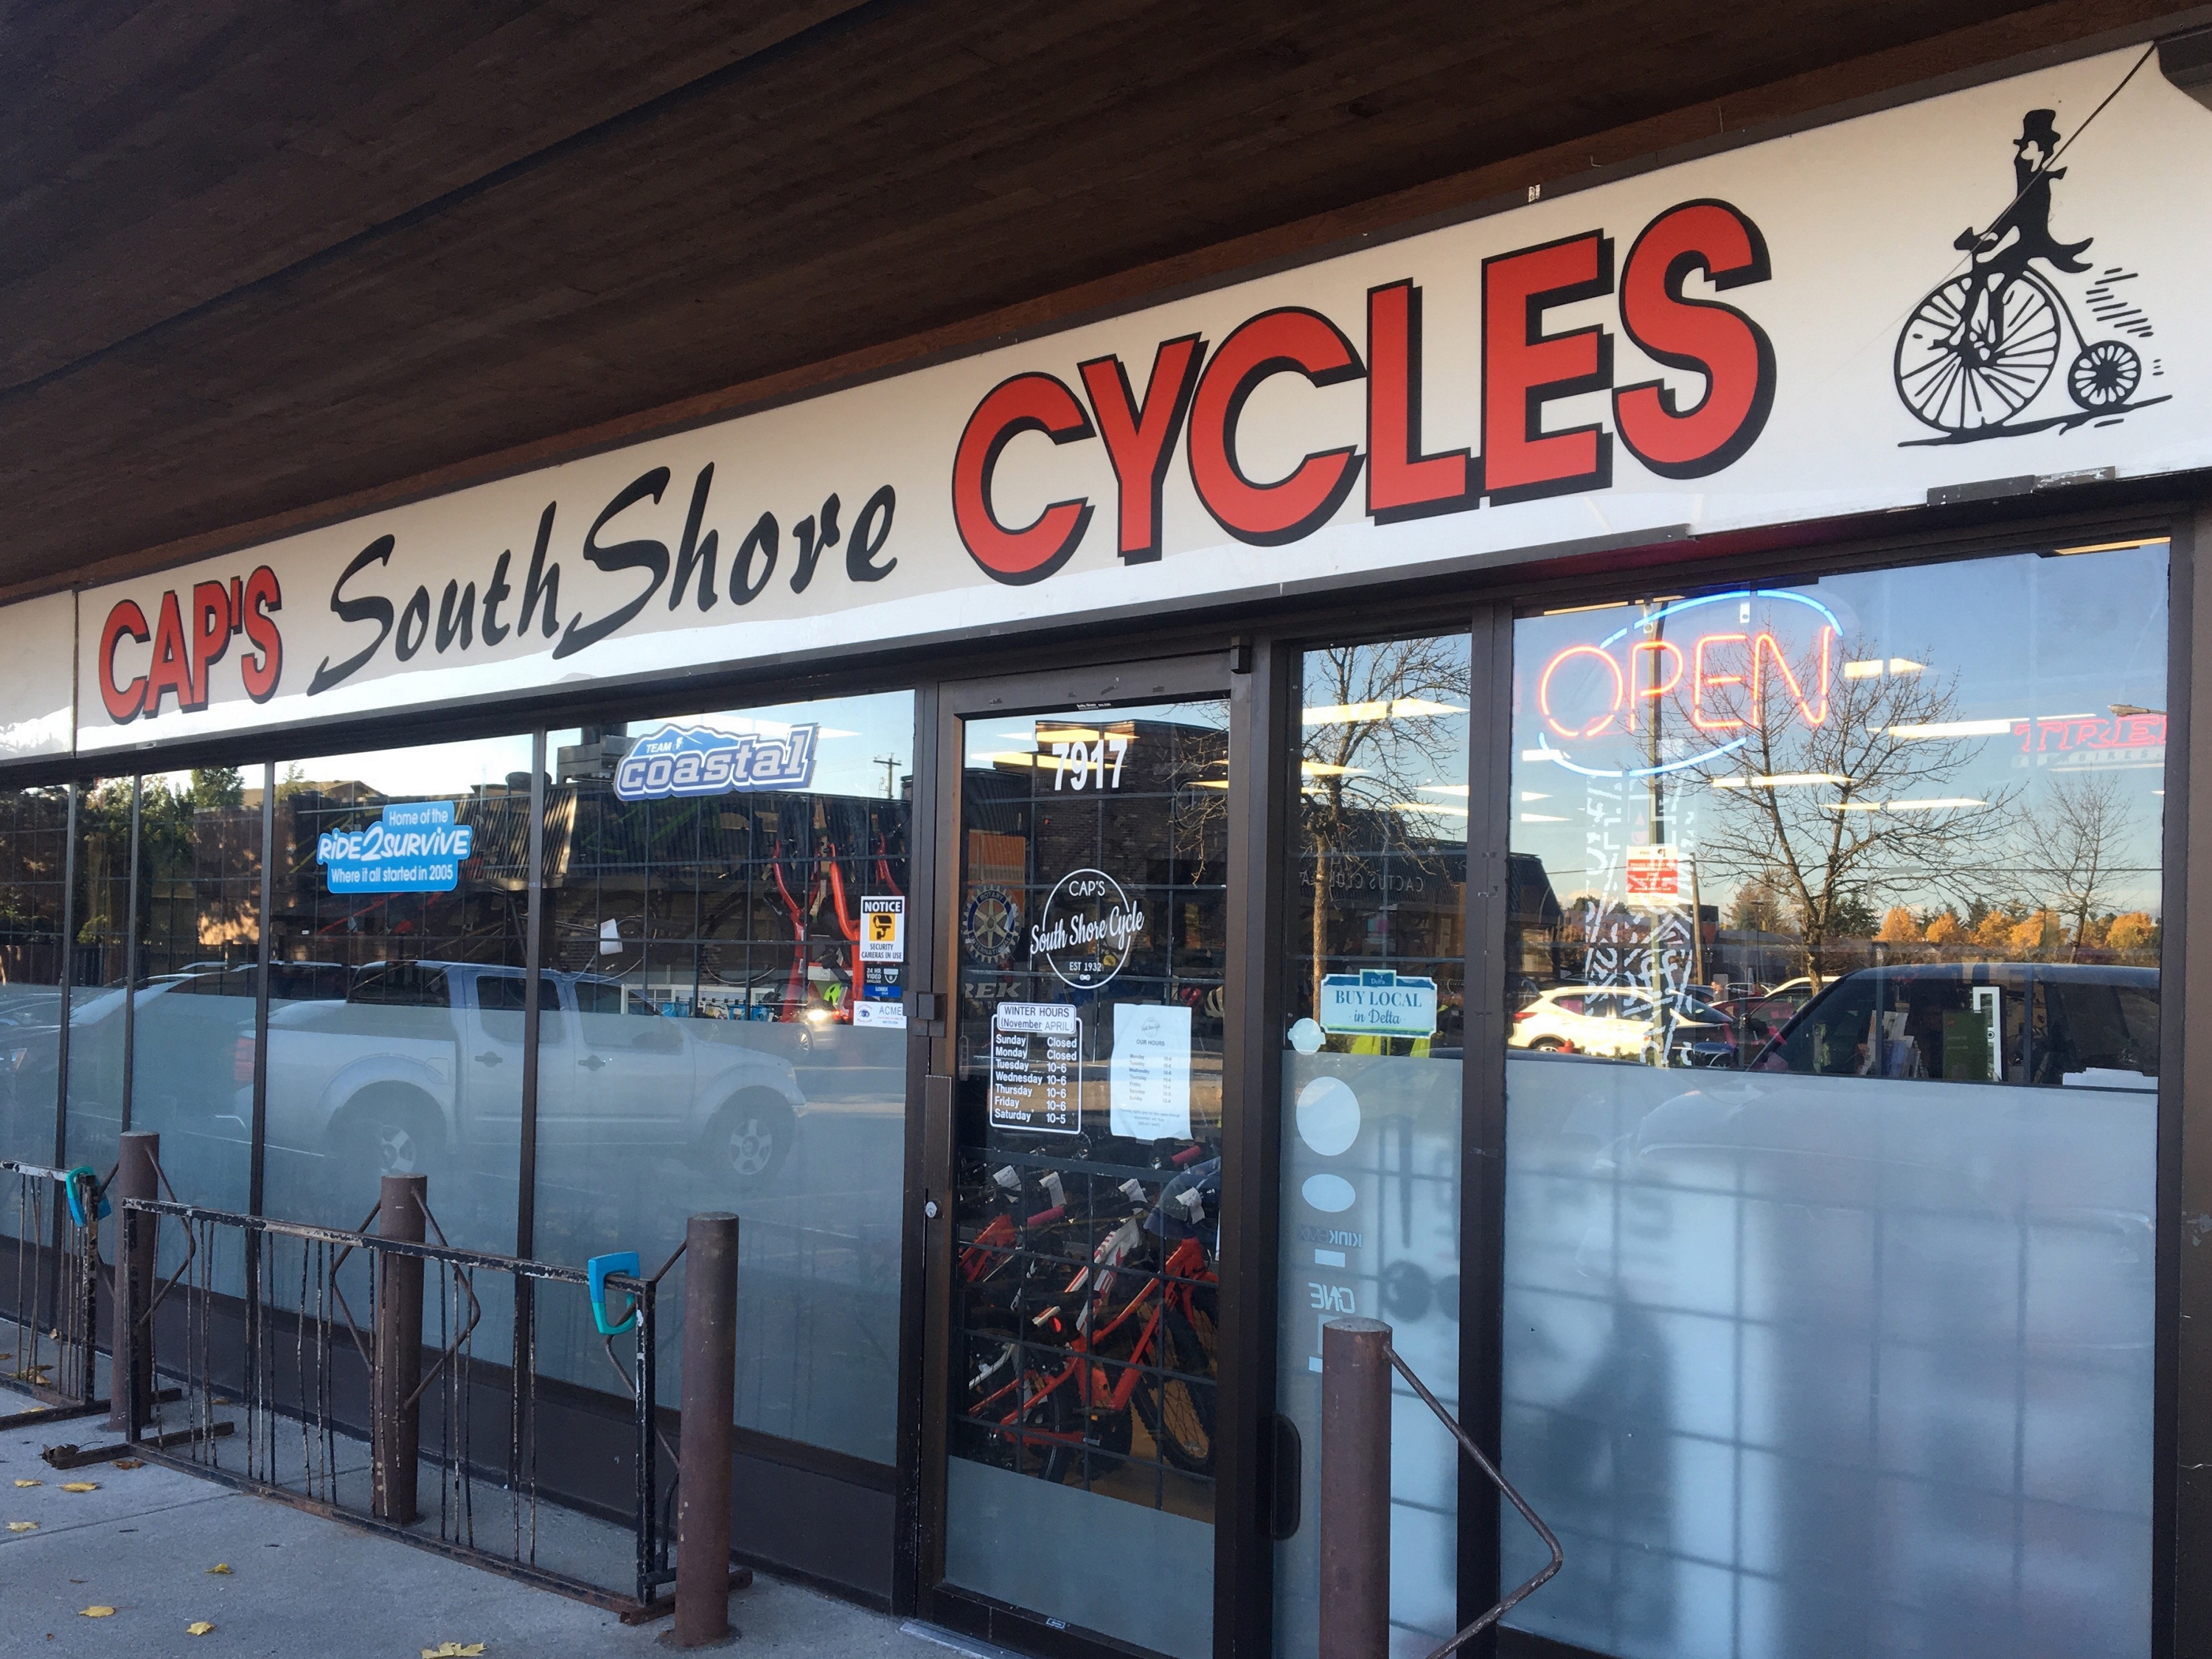 Cap's South Shore Cycles | Store 